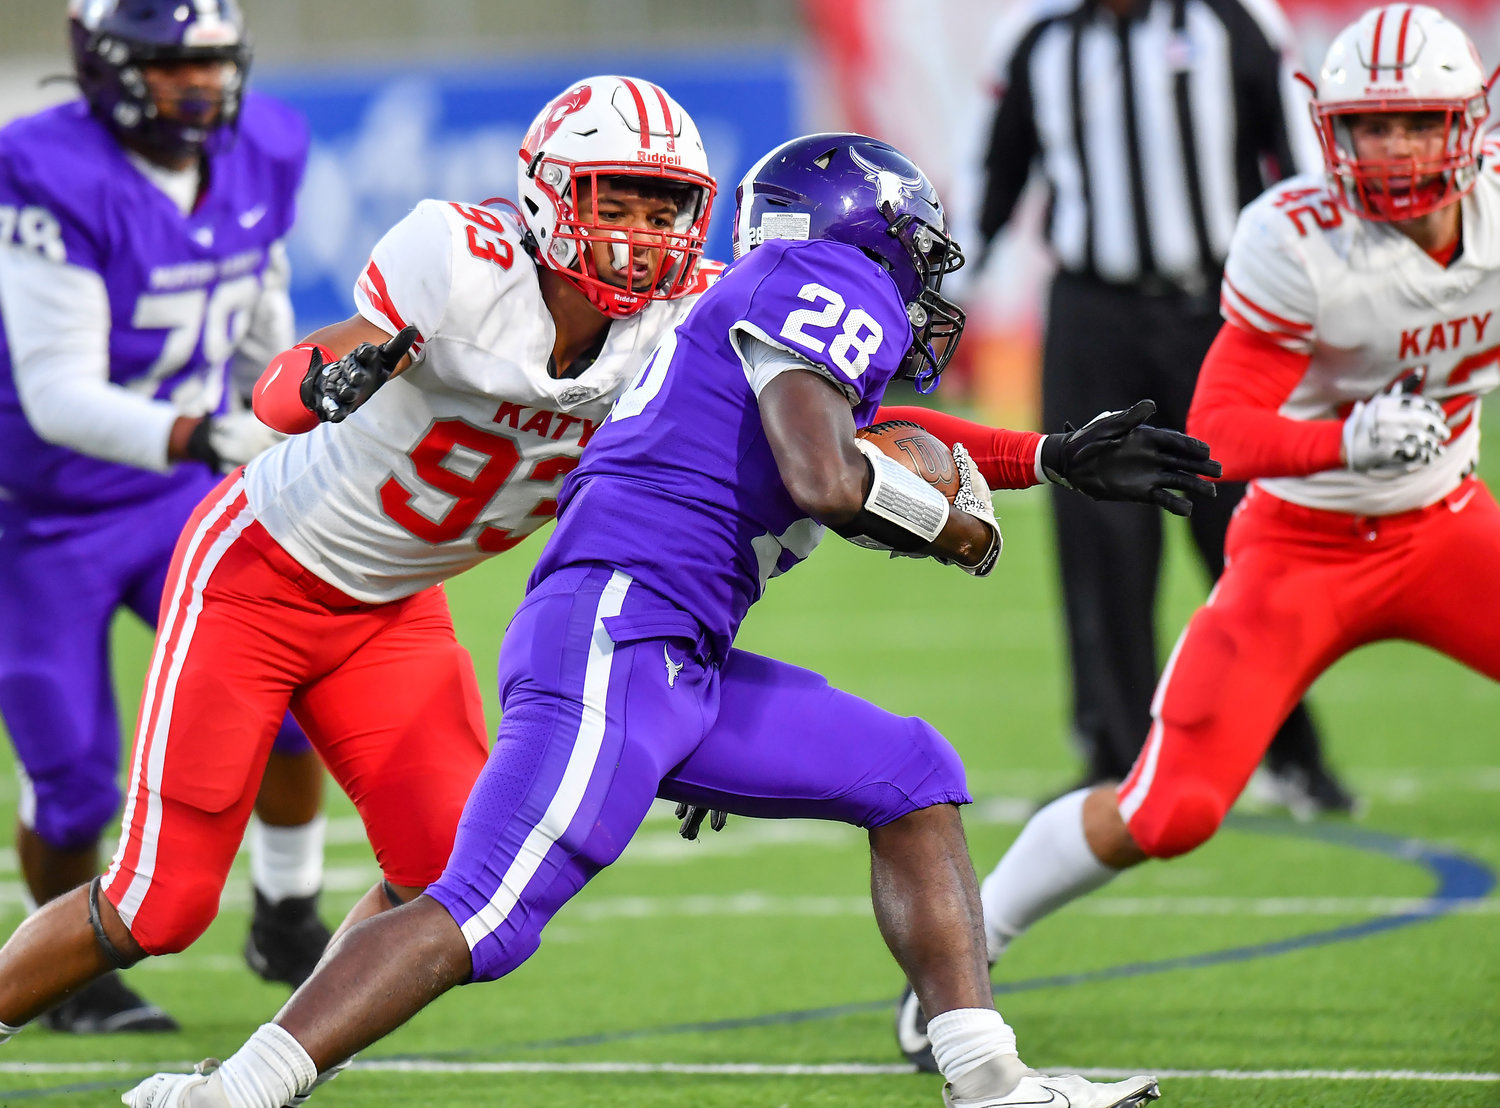 Katy, Tx. Nov 5, 2021: Katy's Broderick Johnson #93 makes the stop on Morton Ranch Ryan's Hall #28 during a conference game between Katy and Morton Ranch at Legacy Stadium in Katy. (Photo by Mark Goodman / Katy Times)